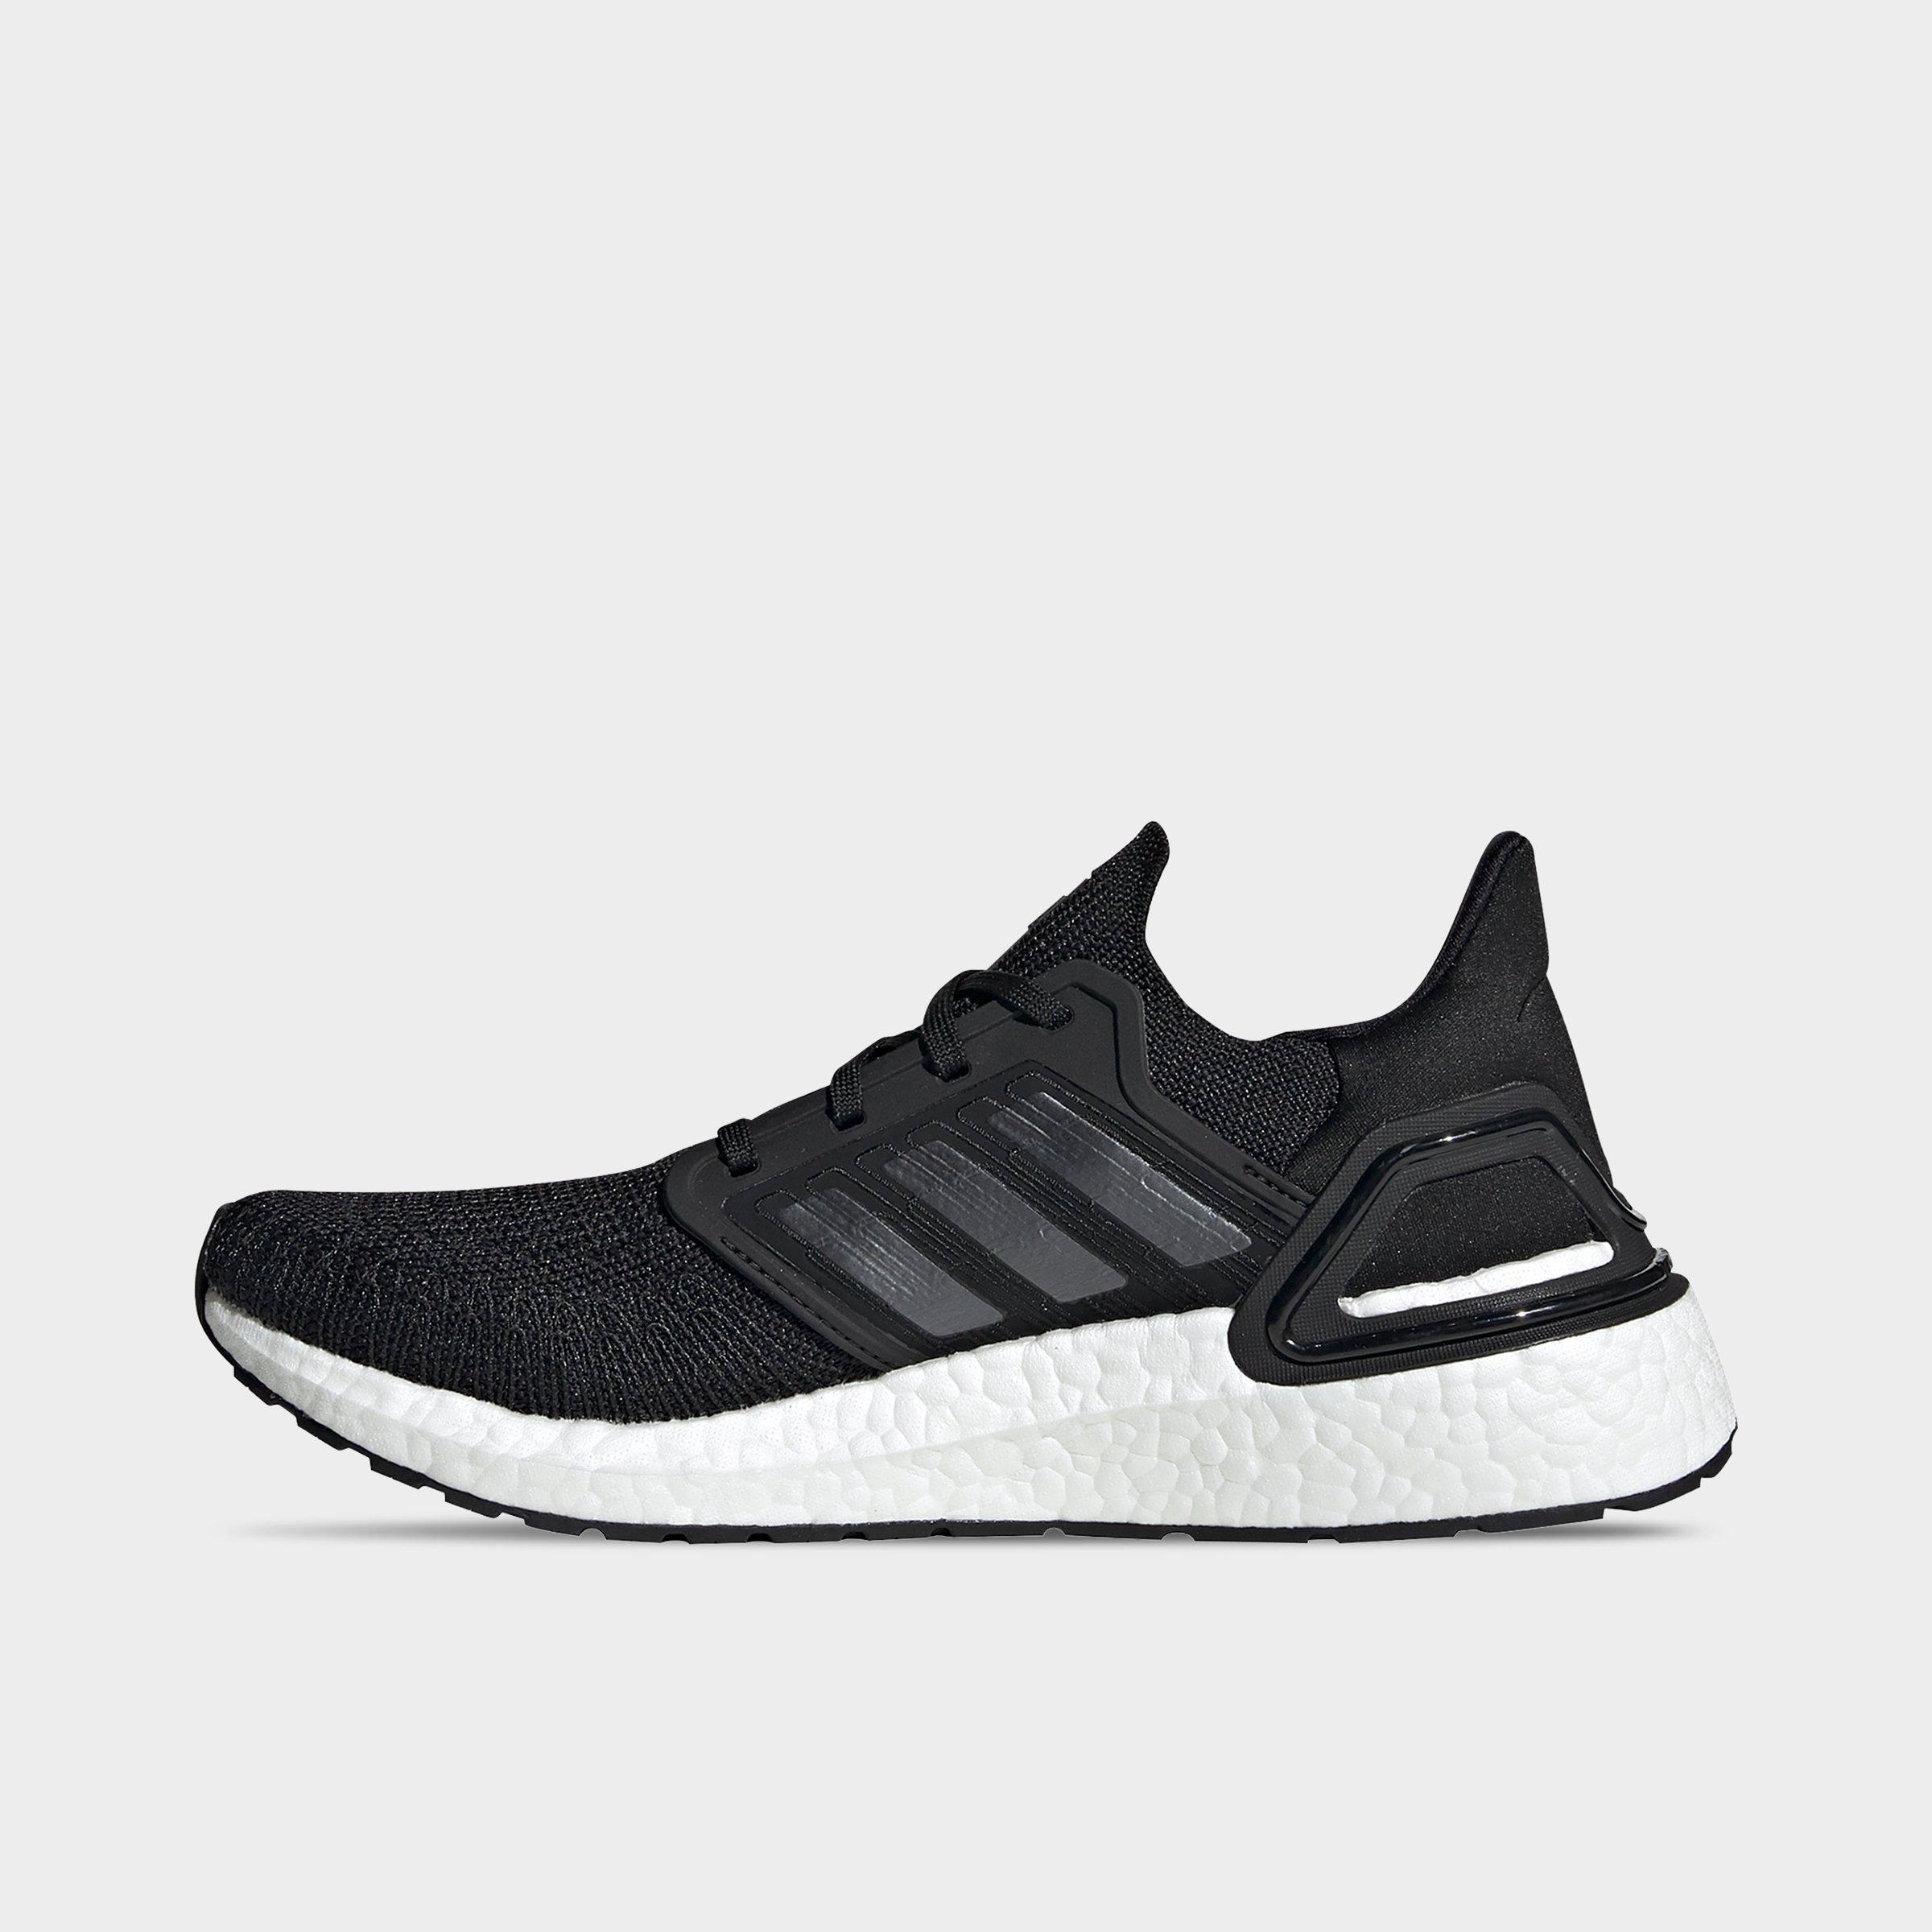 adidas Shoes, Clothing \u0026 Accessories | Boost, NMD, Stan Smith | Finish Line